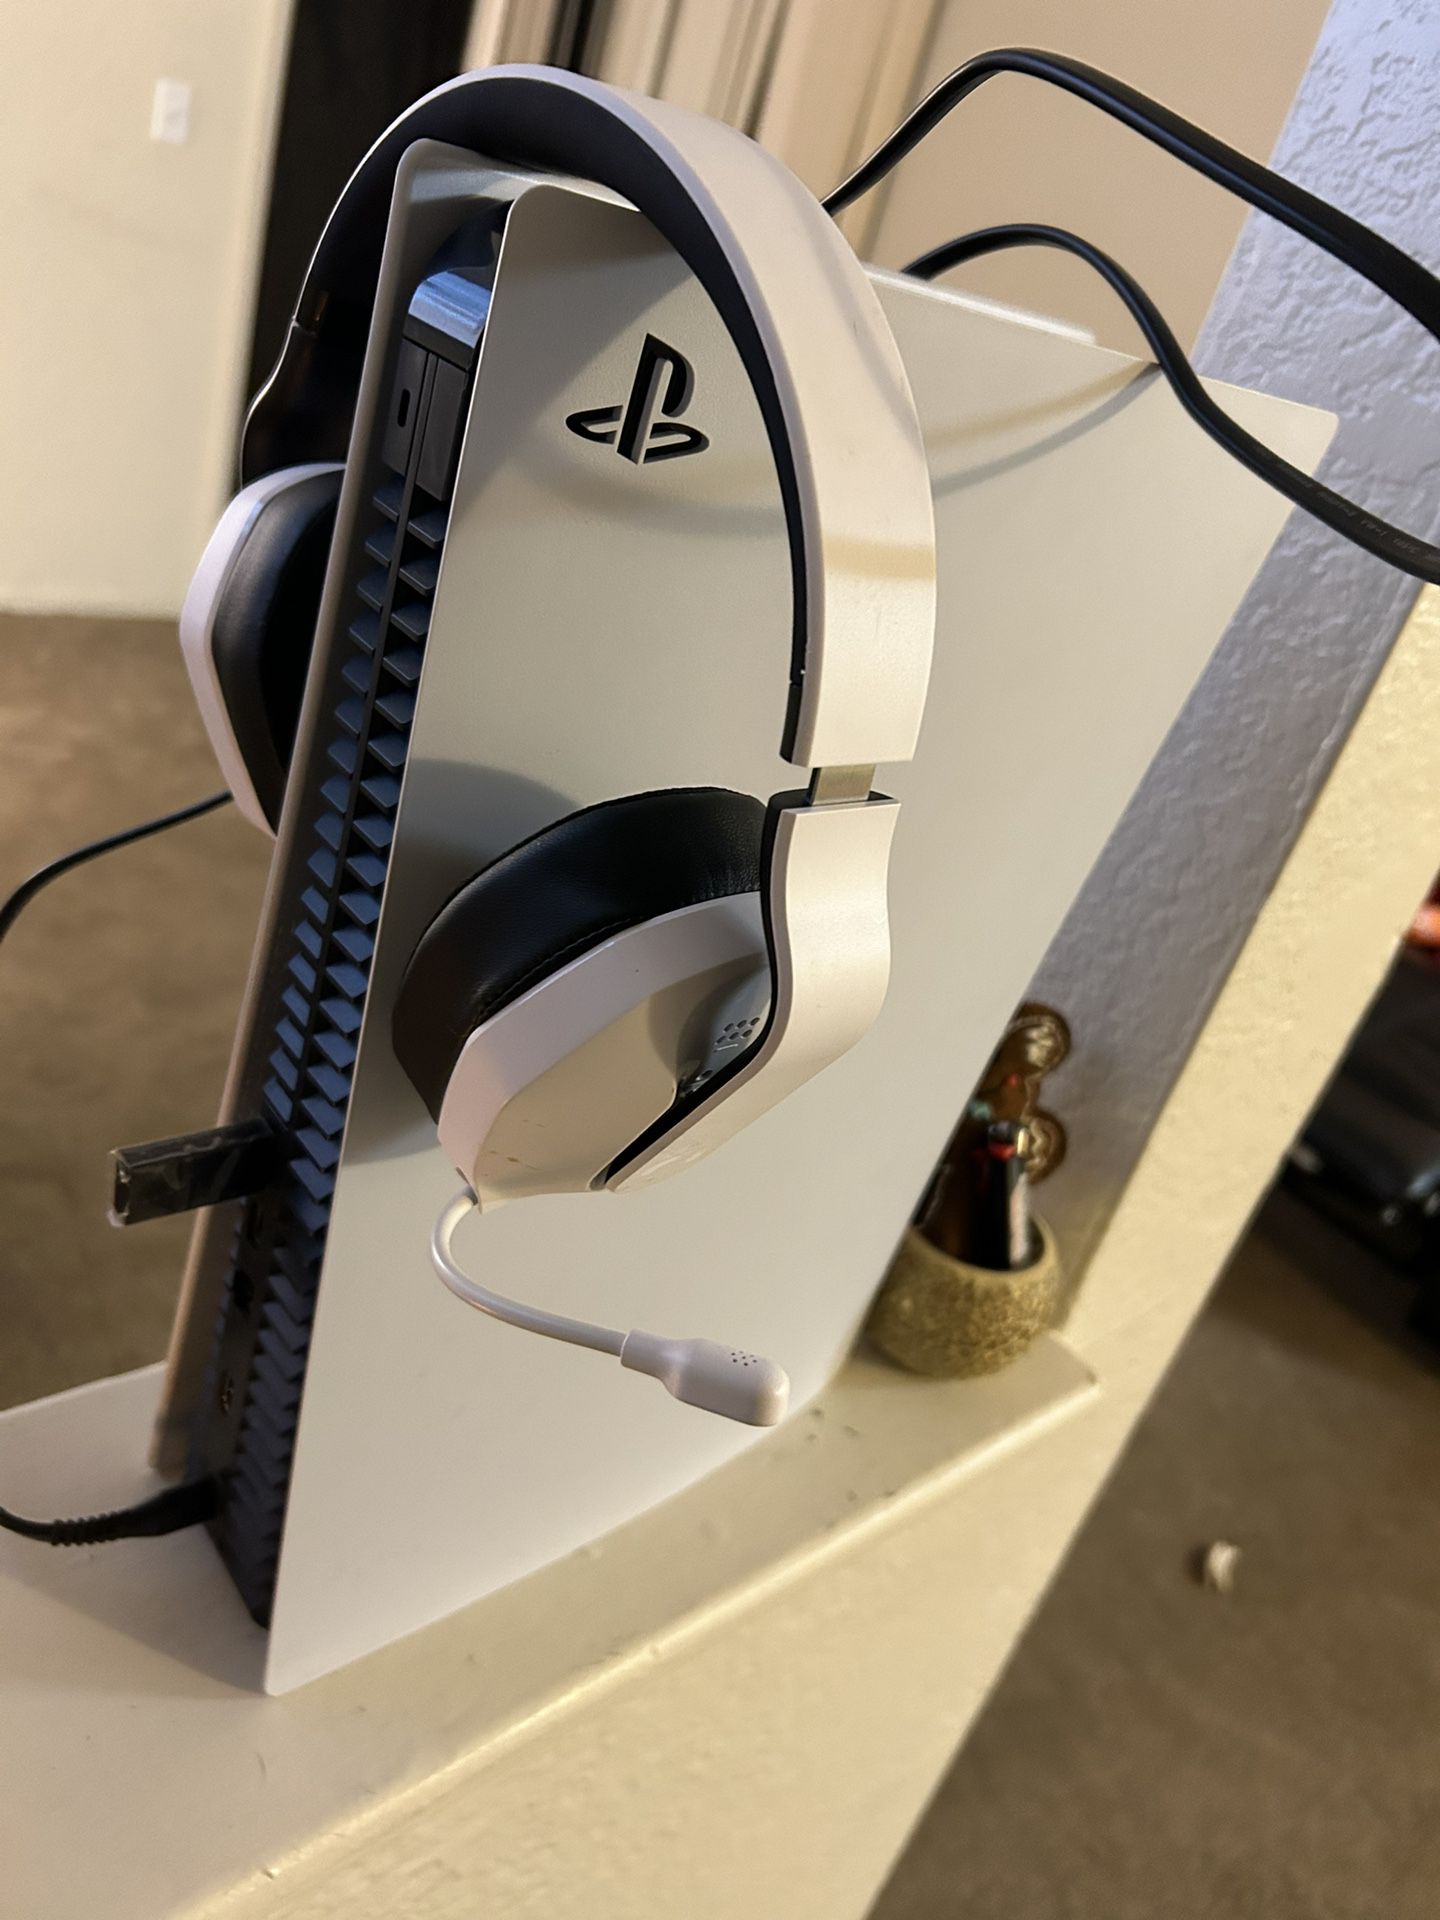 Ps5 And Accessories 